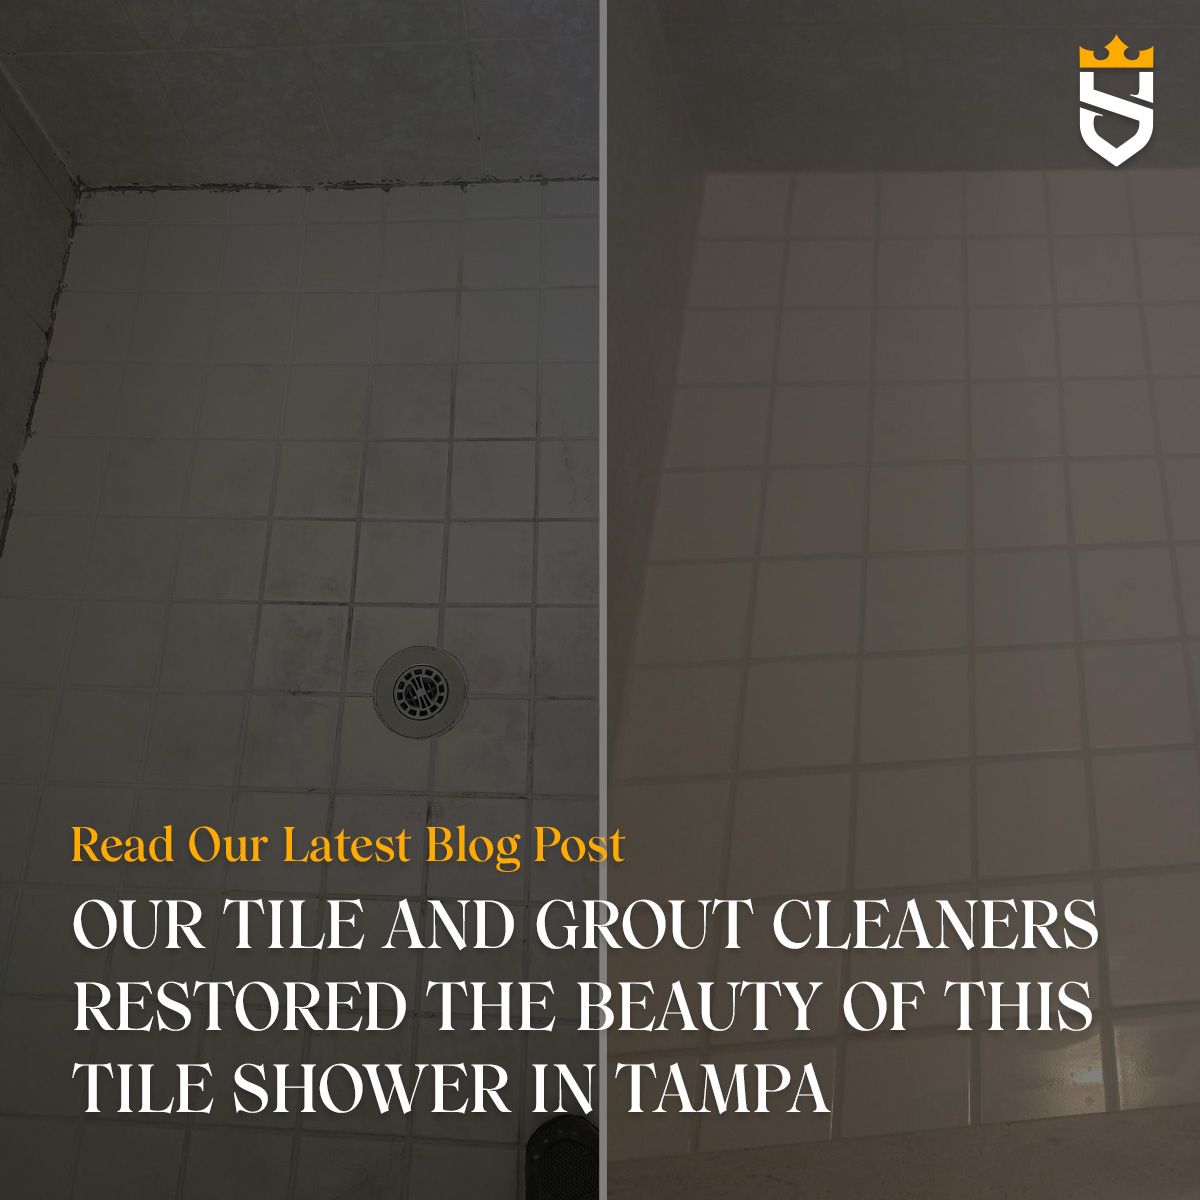 Our Tile and Grout Cleaners Restored the Beauty of This Tile Shower in Tampa